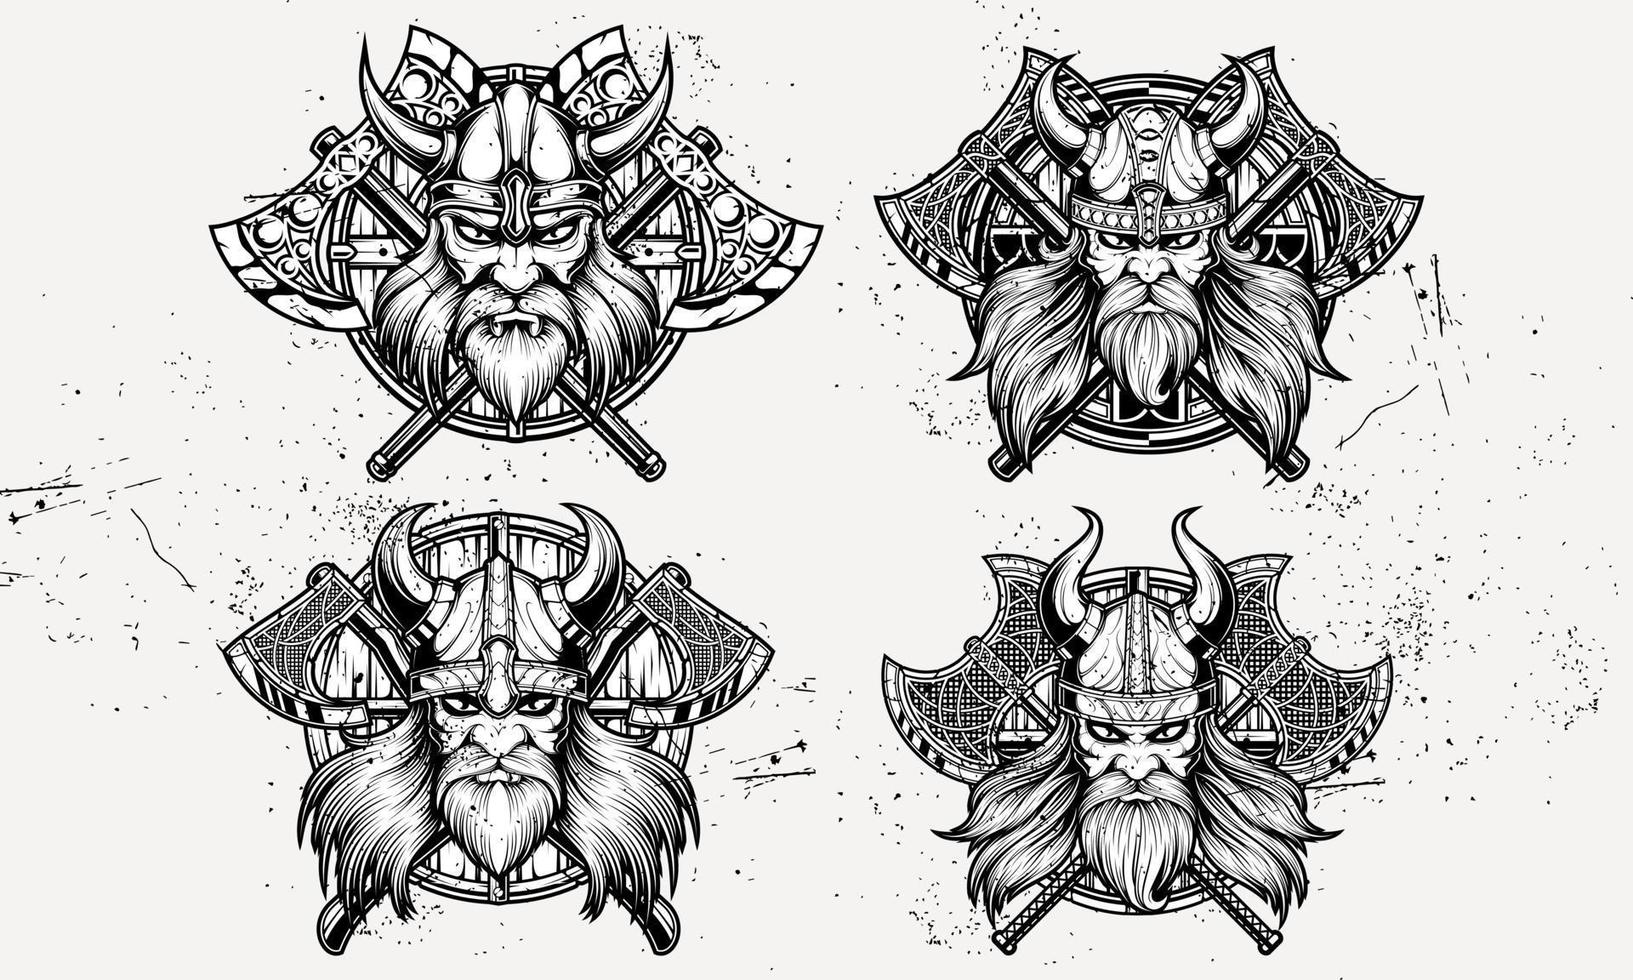 A Viking design is bold and powerful, featuring symbols an axes, and shields, evoking the spirit of the fearless warriors and conquer vector